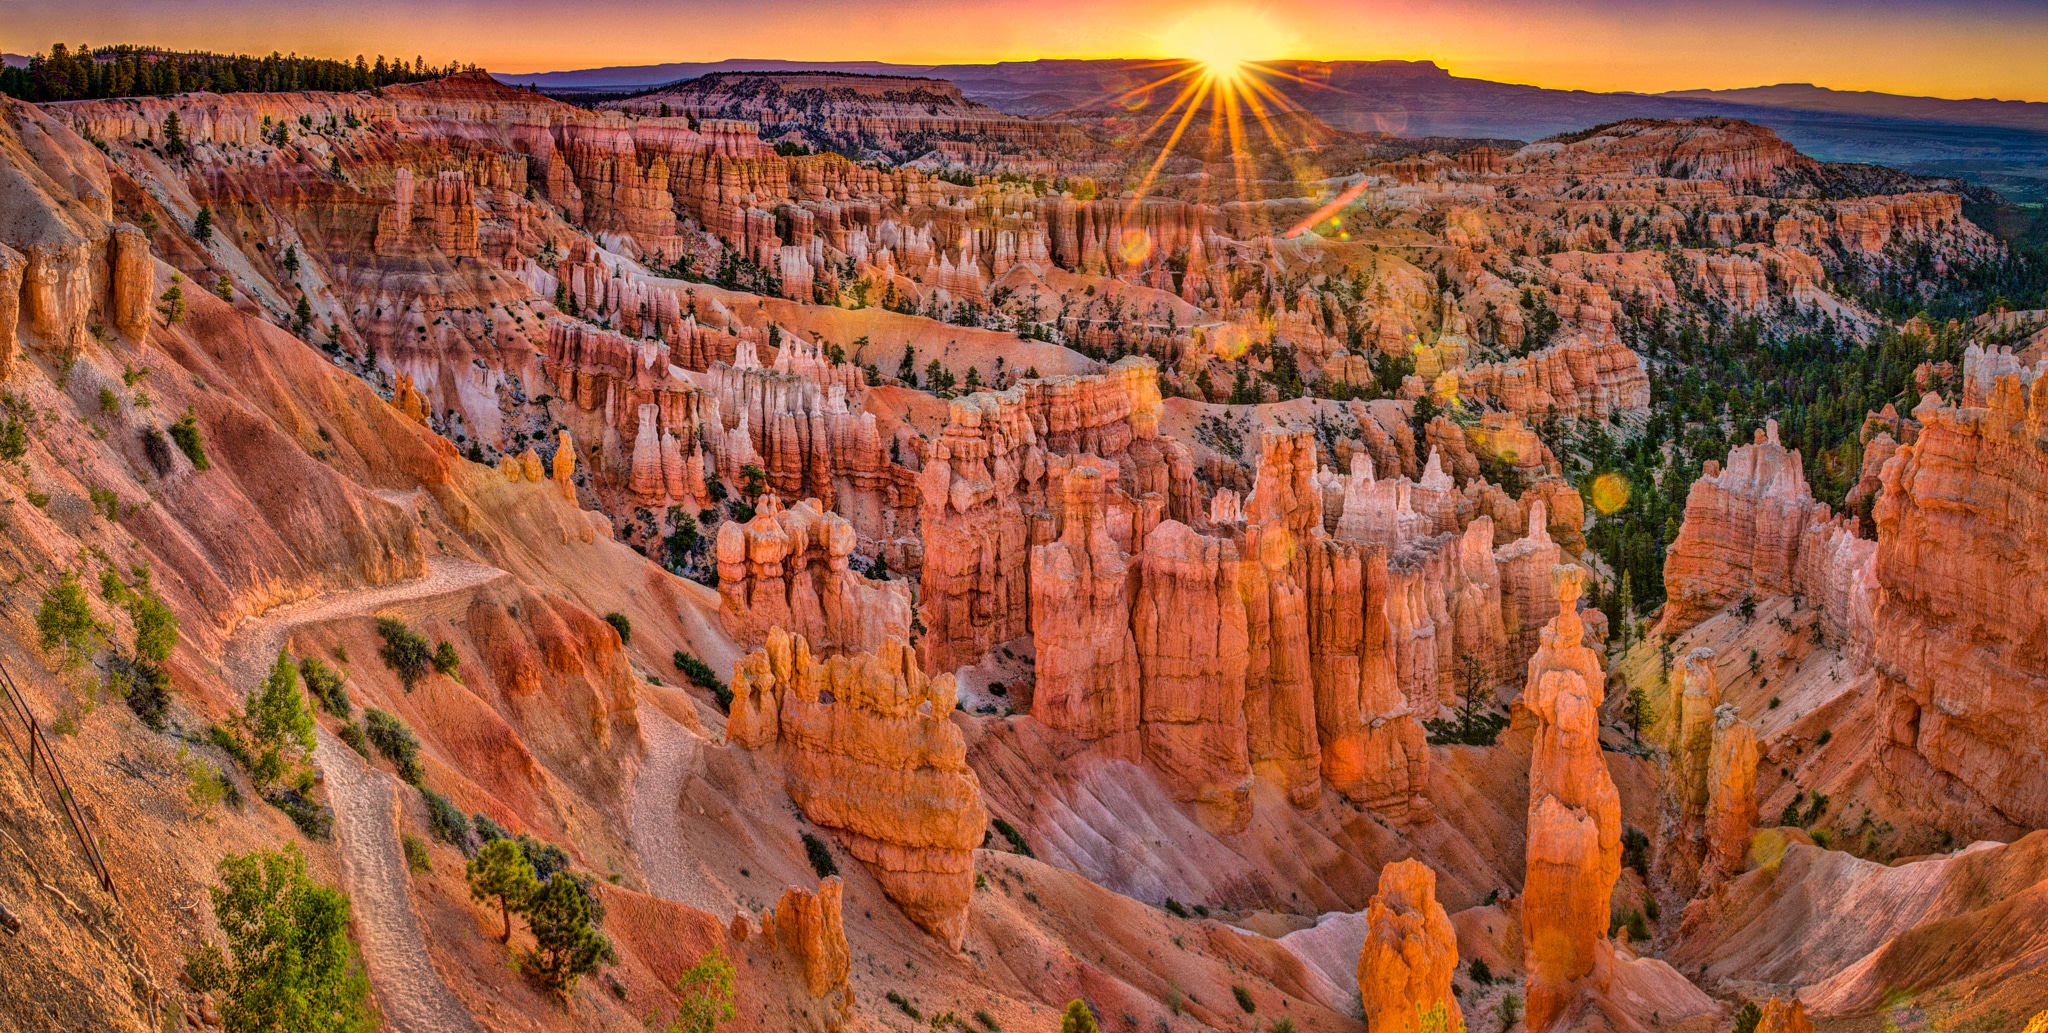 Sunrise view from Sunset Point in Bryce Canyon National Park, Utah.